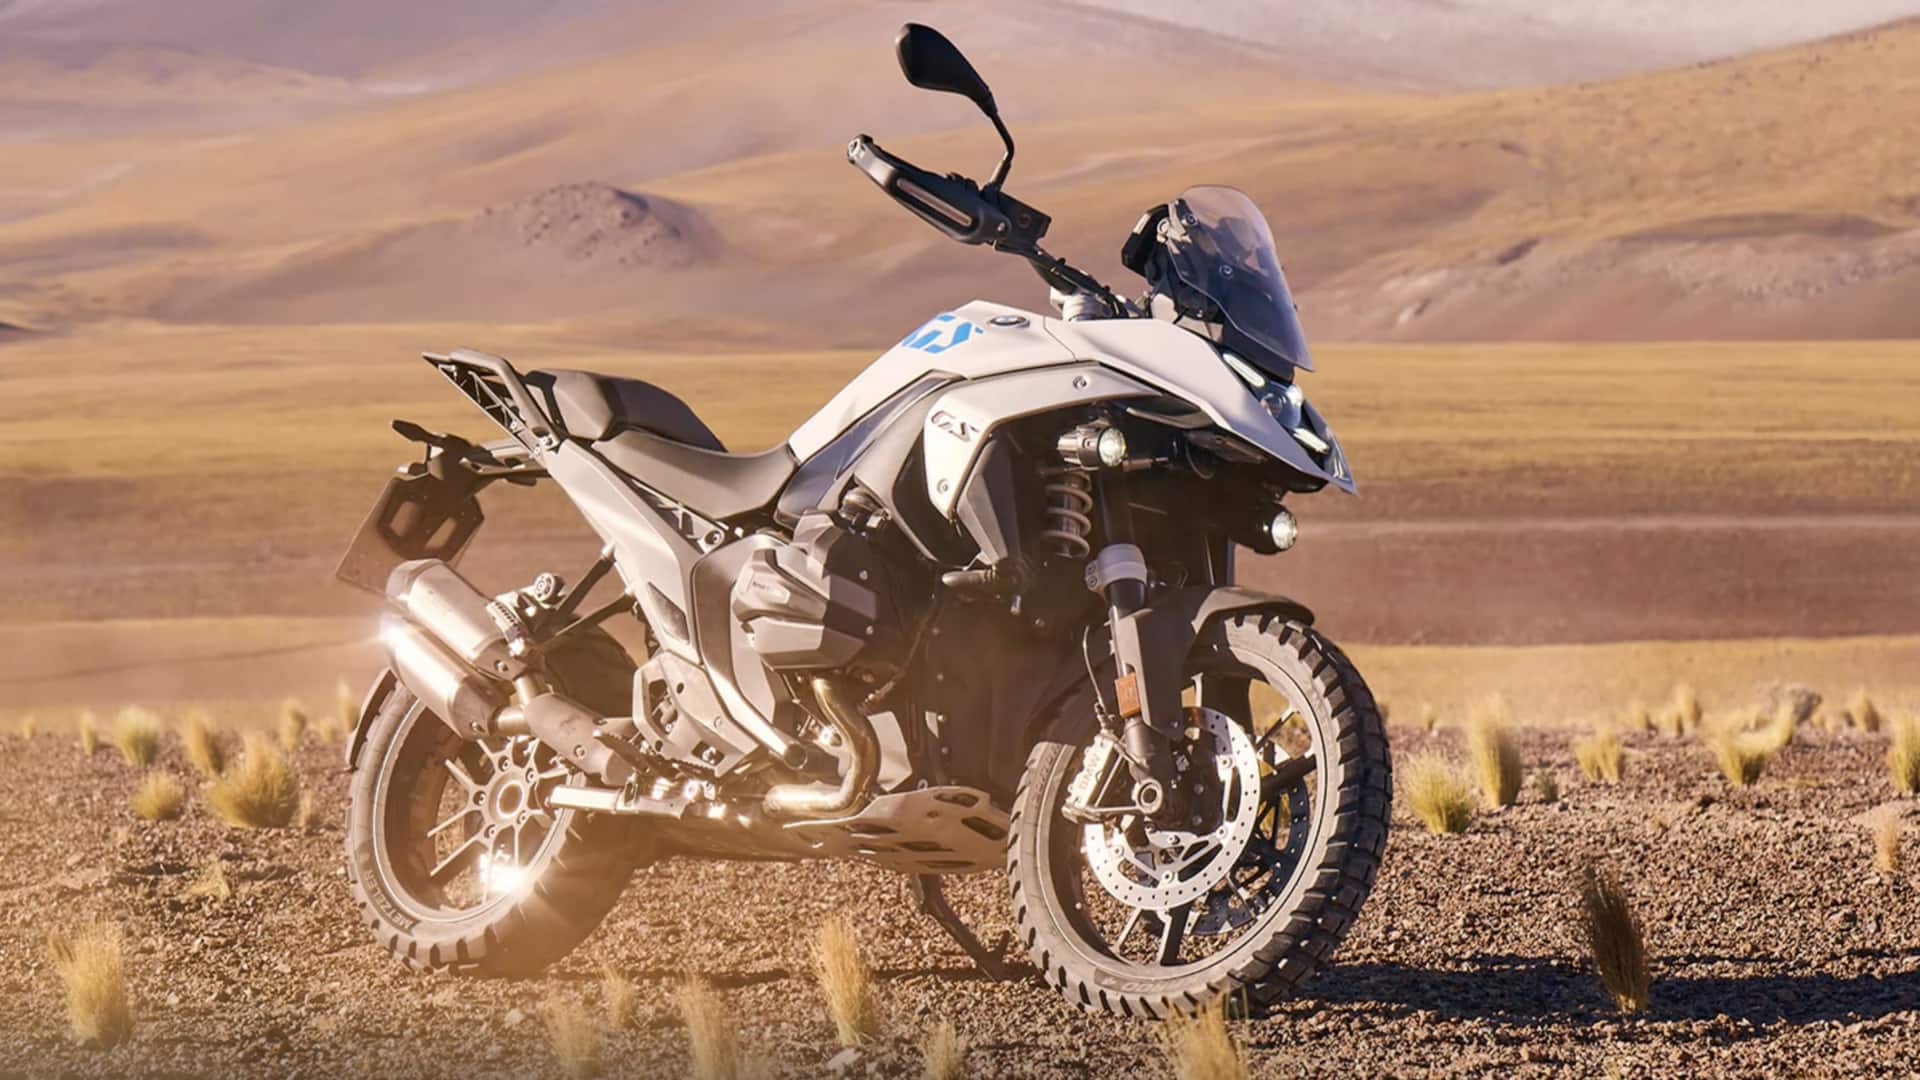 BMW R 1300 GS to launch in India next week